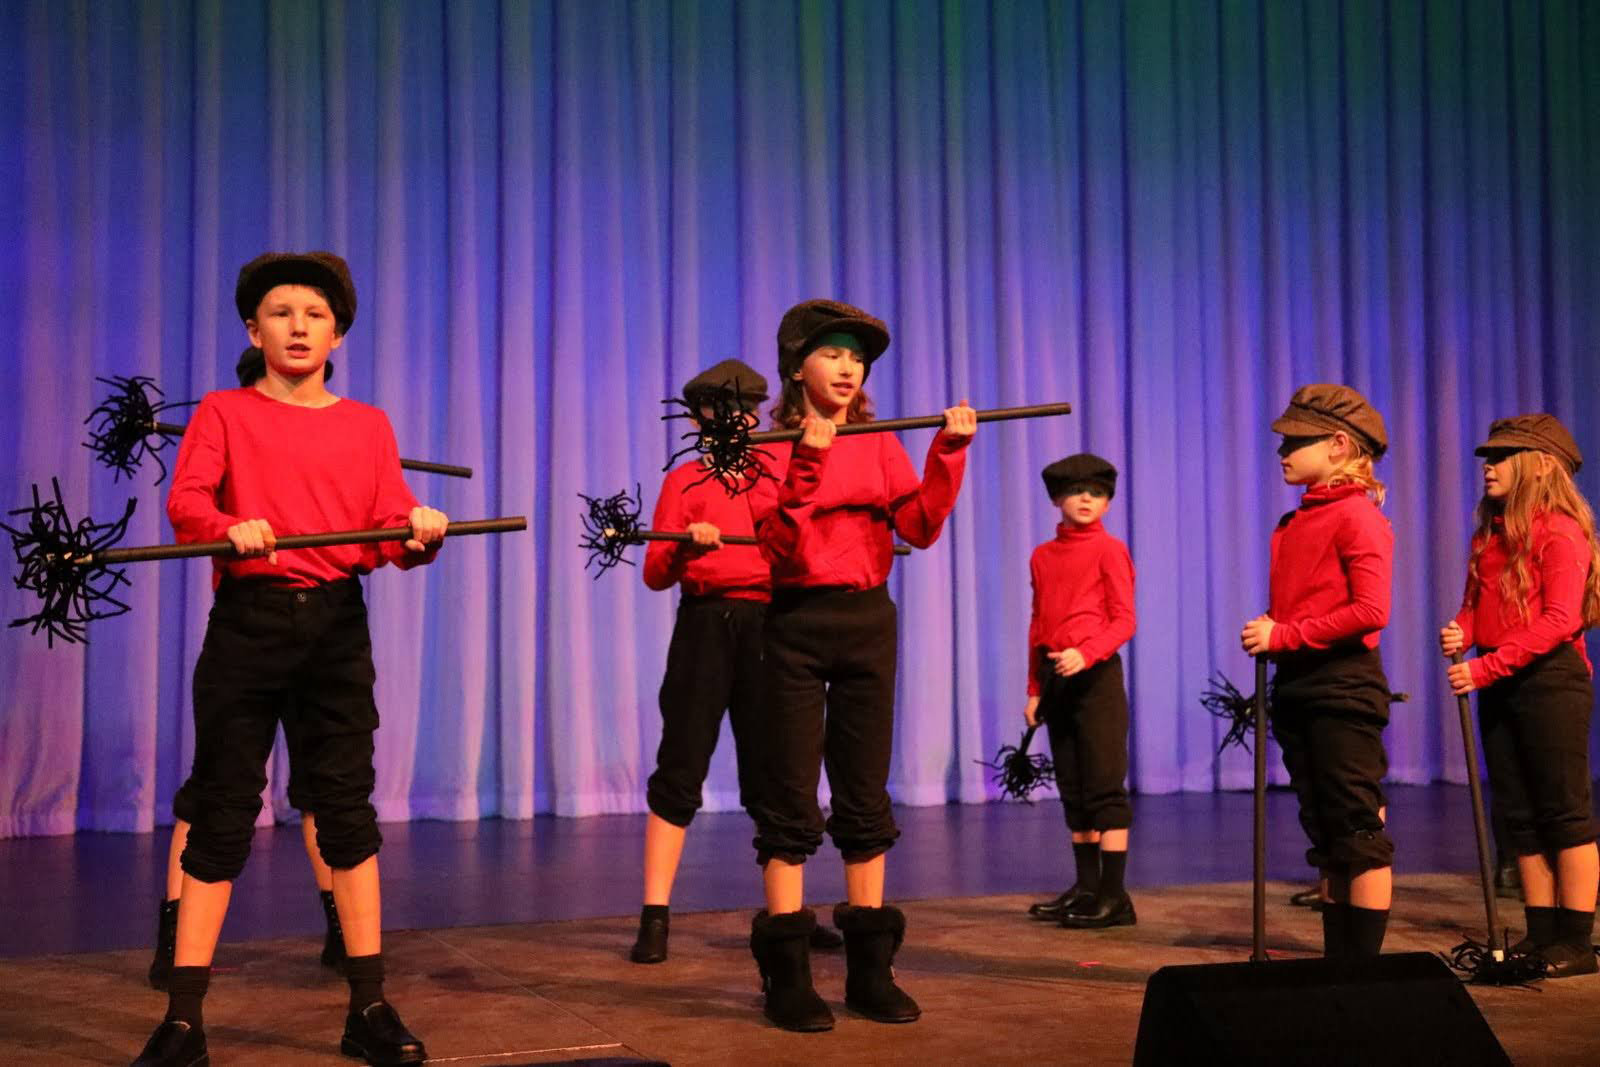 Children dressed as chimney sweeps dance with chimney brushes.